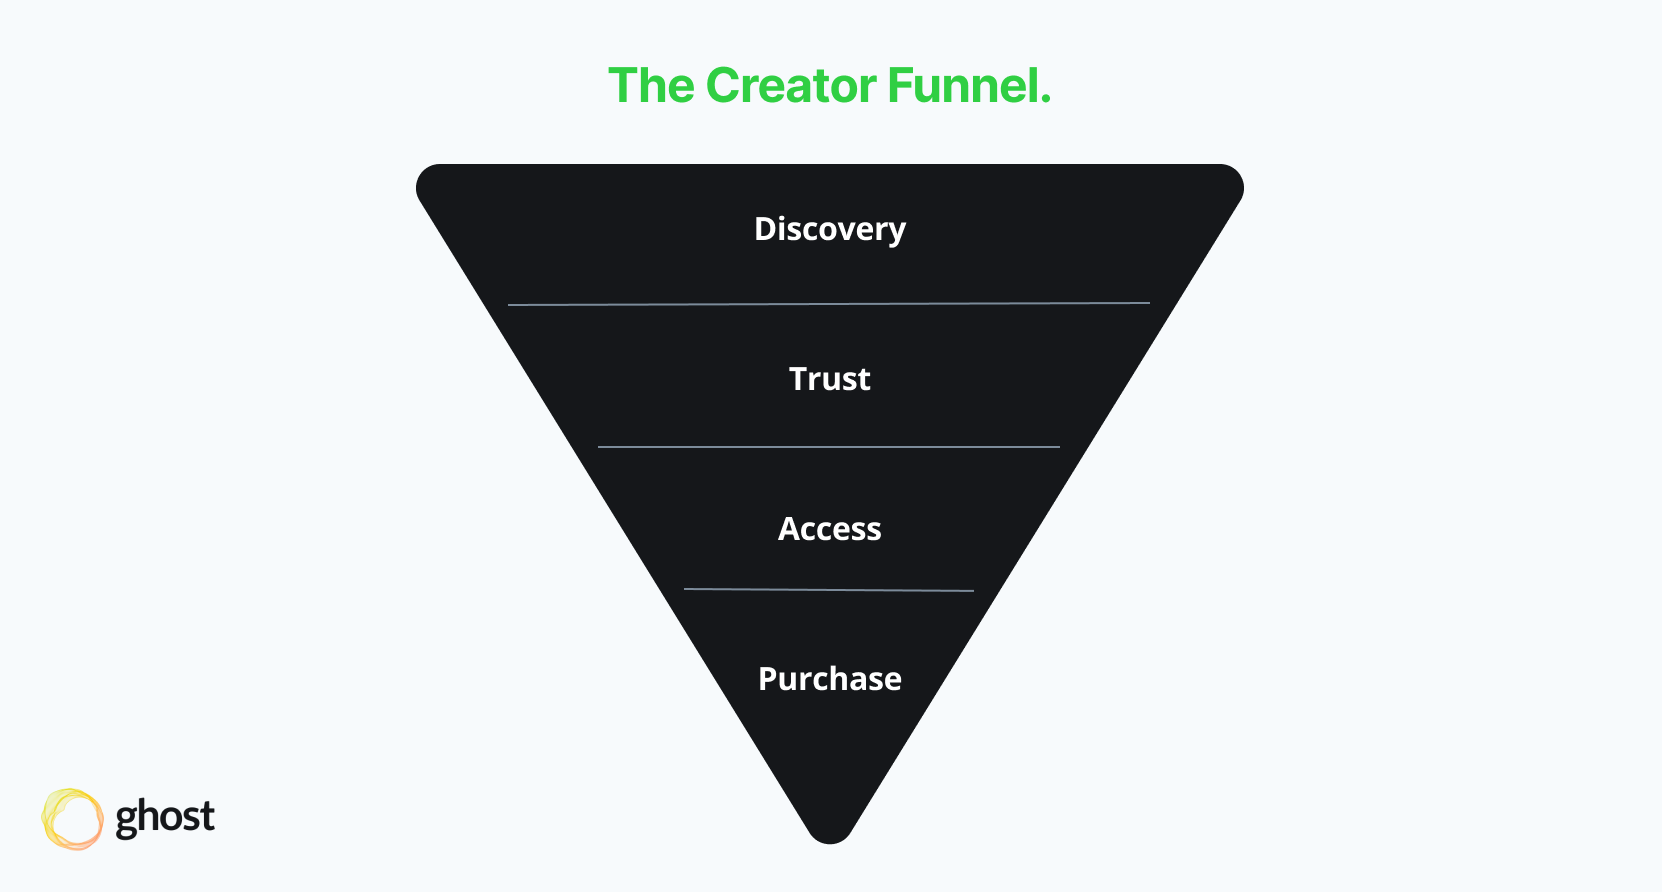 A marketing funnel for content creators: Discovery, Trust, Access, Purchase